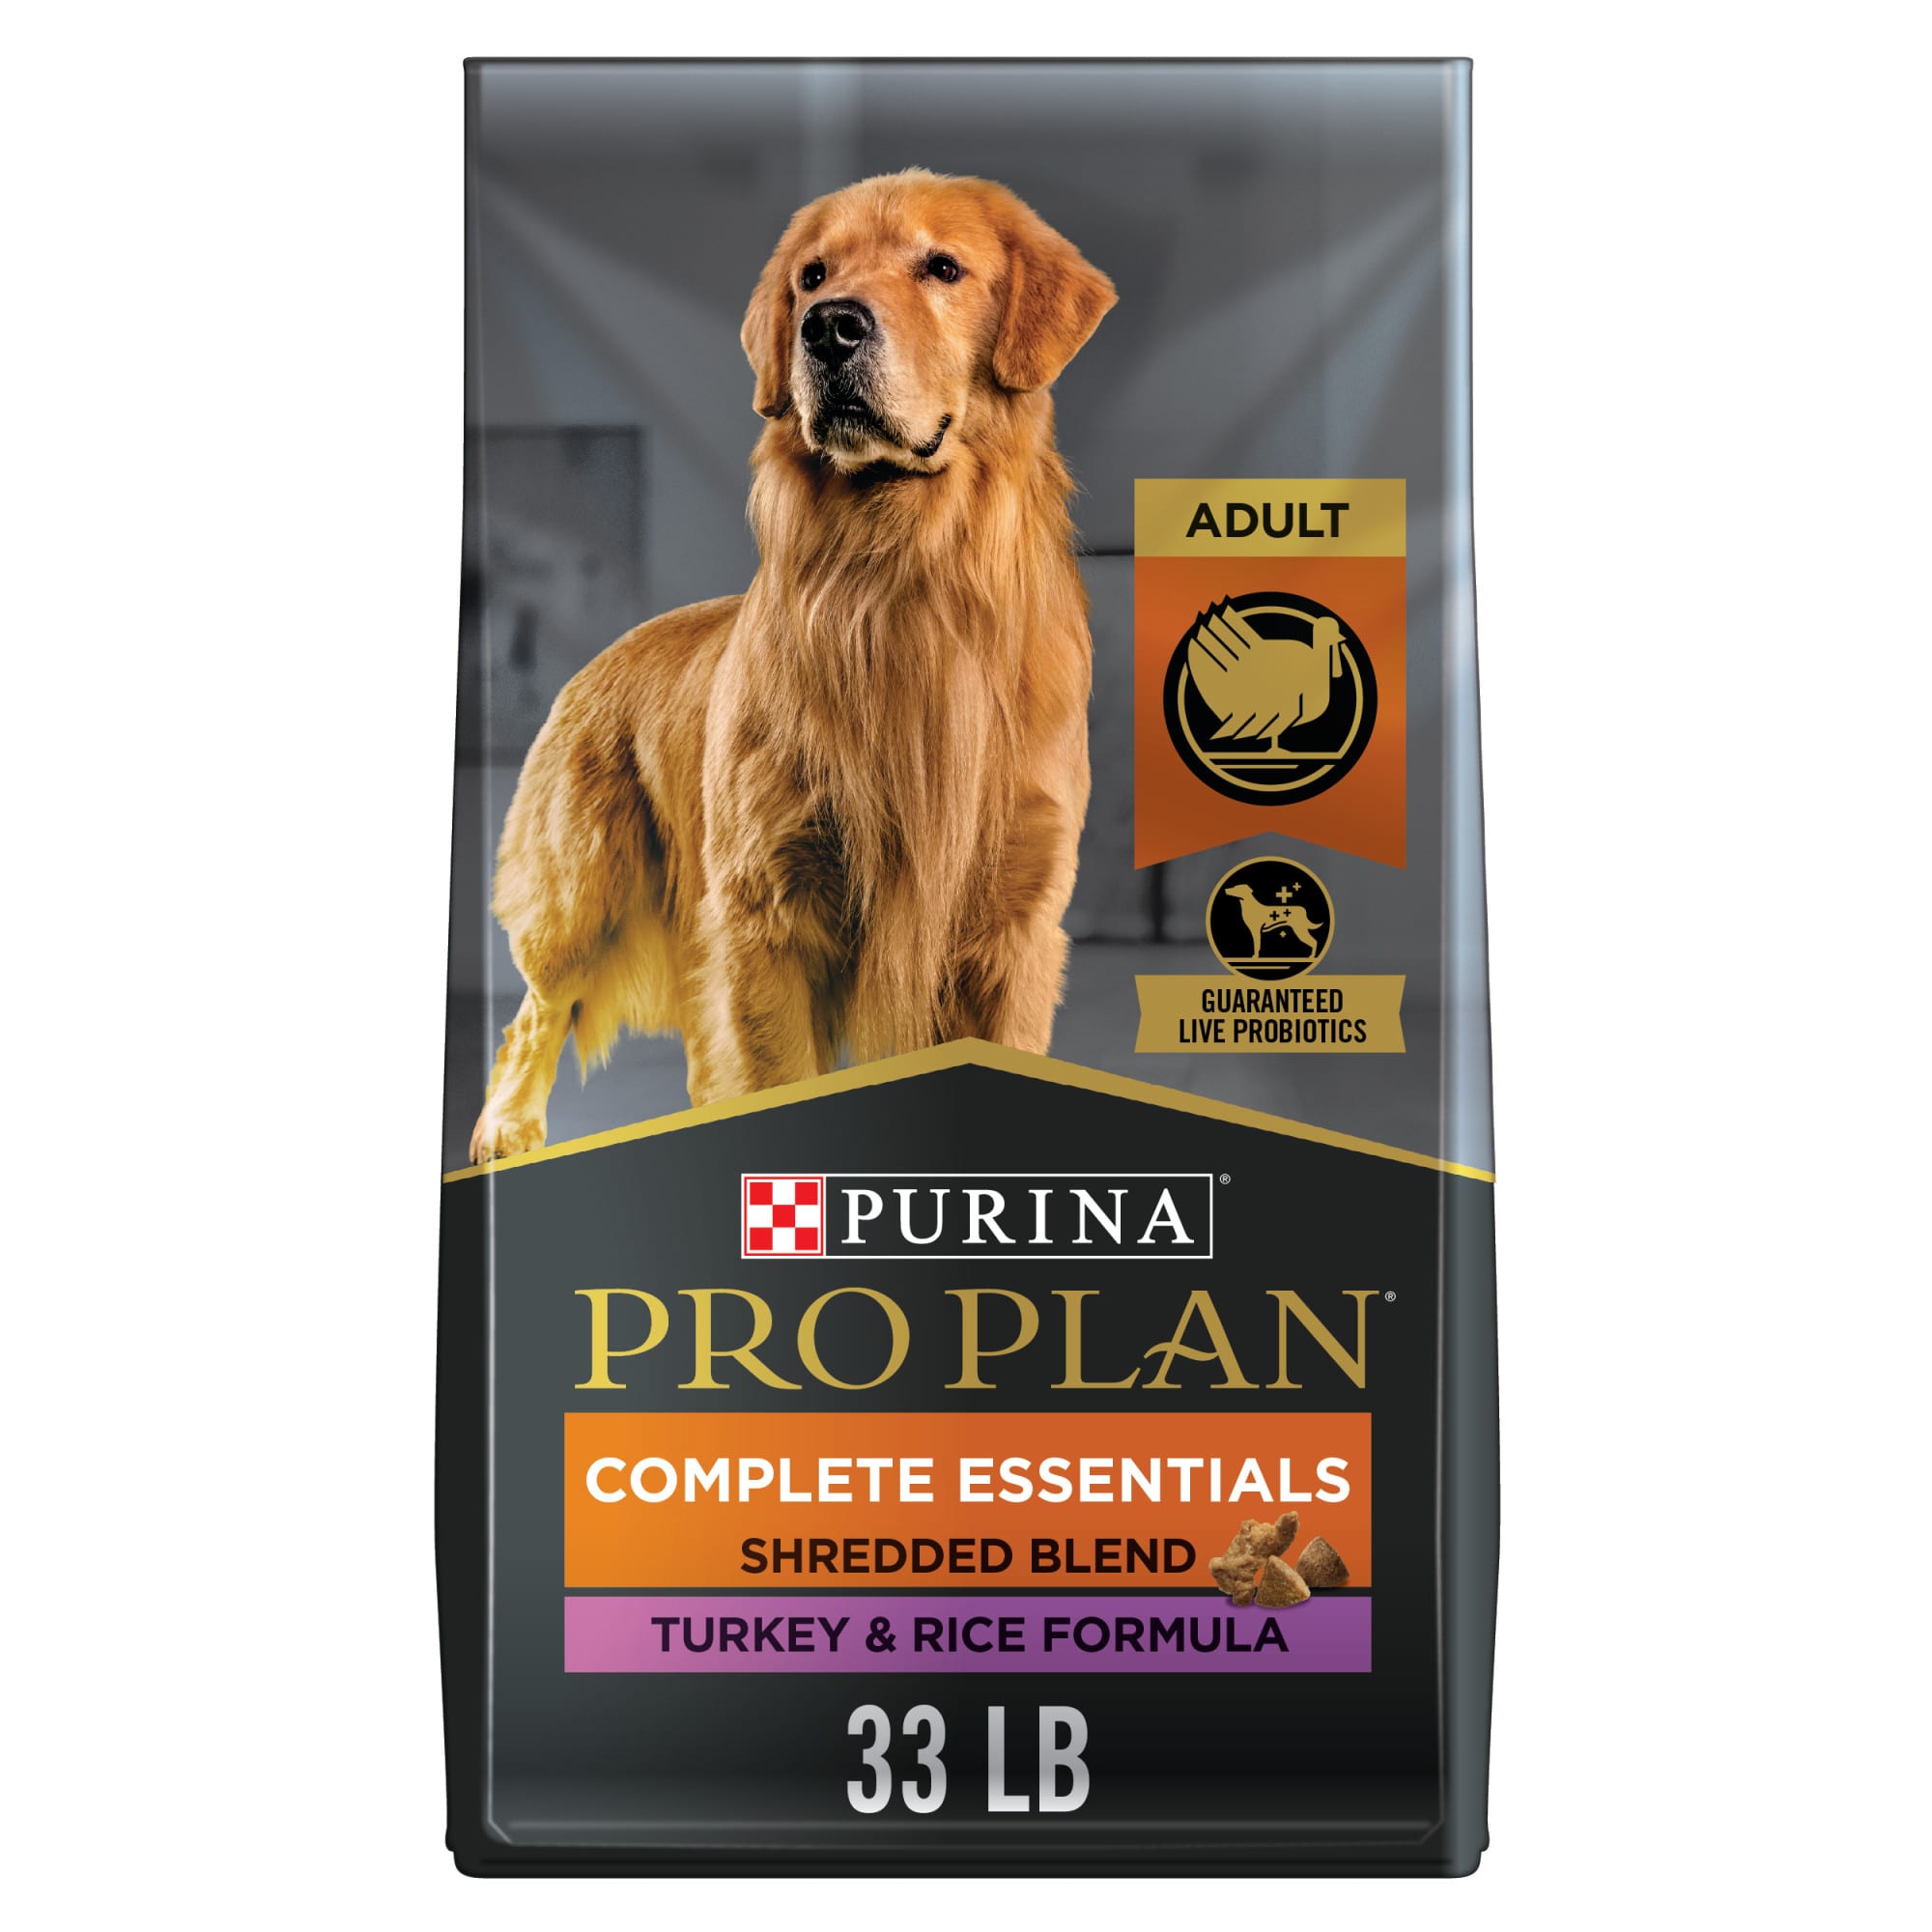 Purina Pro Plan High Protein Complete Essentials Shredded Blend Turkey & Rice Formula Adult Dry Dog Food, 33 lbs.